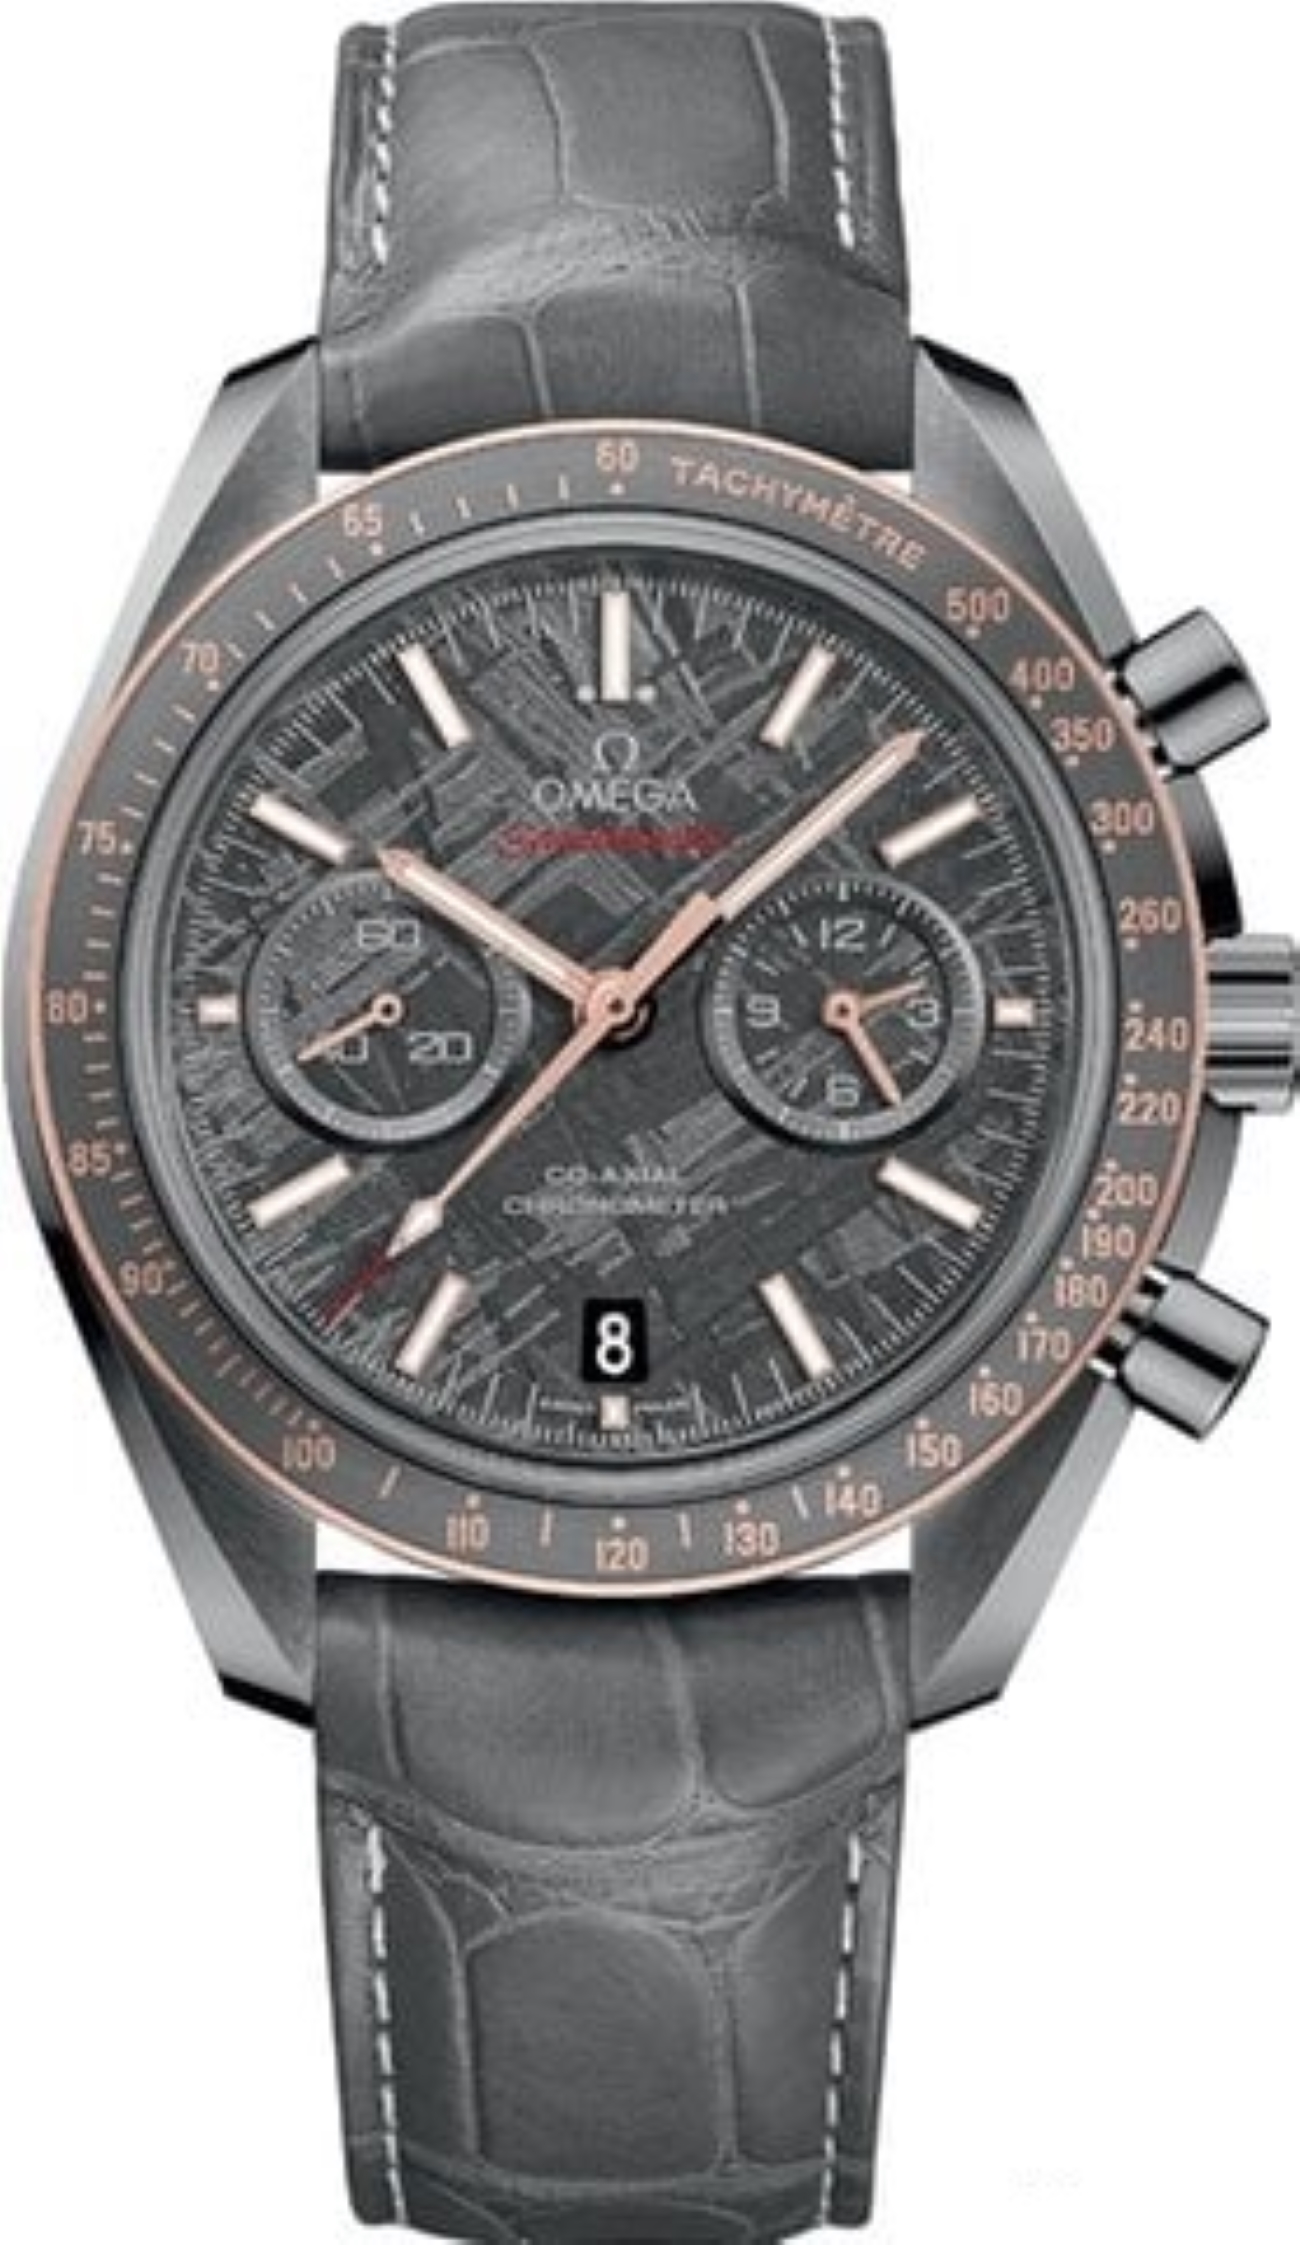 OMEGA SPEEDMASTER DARK SIDE OF THE MOON CO-AXIAL CHRONOMETER CHRONOGRAPH 44.25MM, METEORITE, GREY CERAMIC ON LEATHER STRAP, REF: 311.63.44.51.99.001